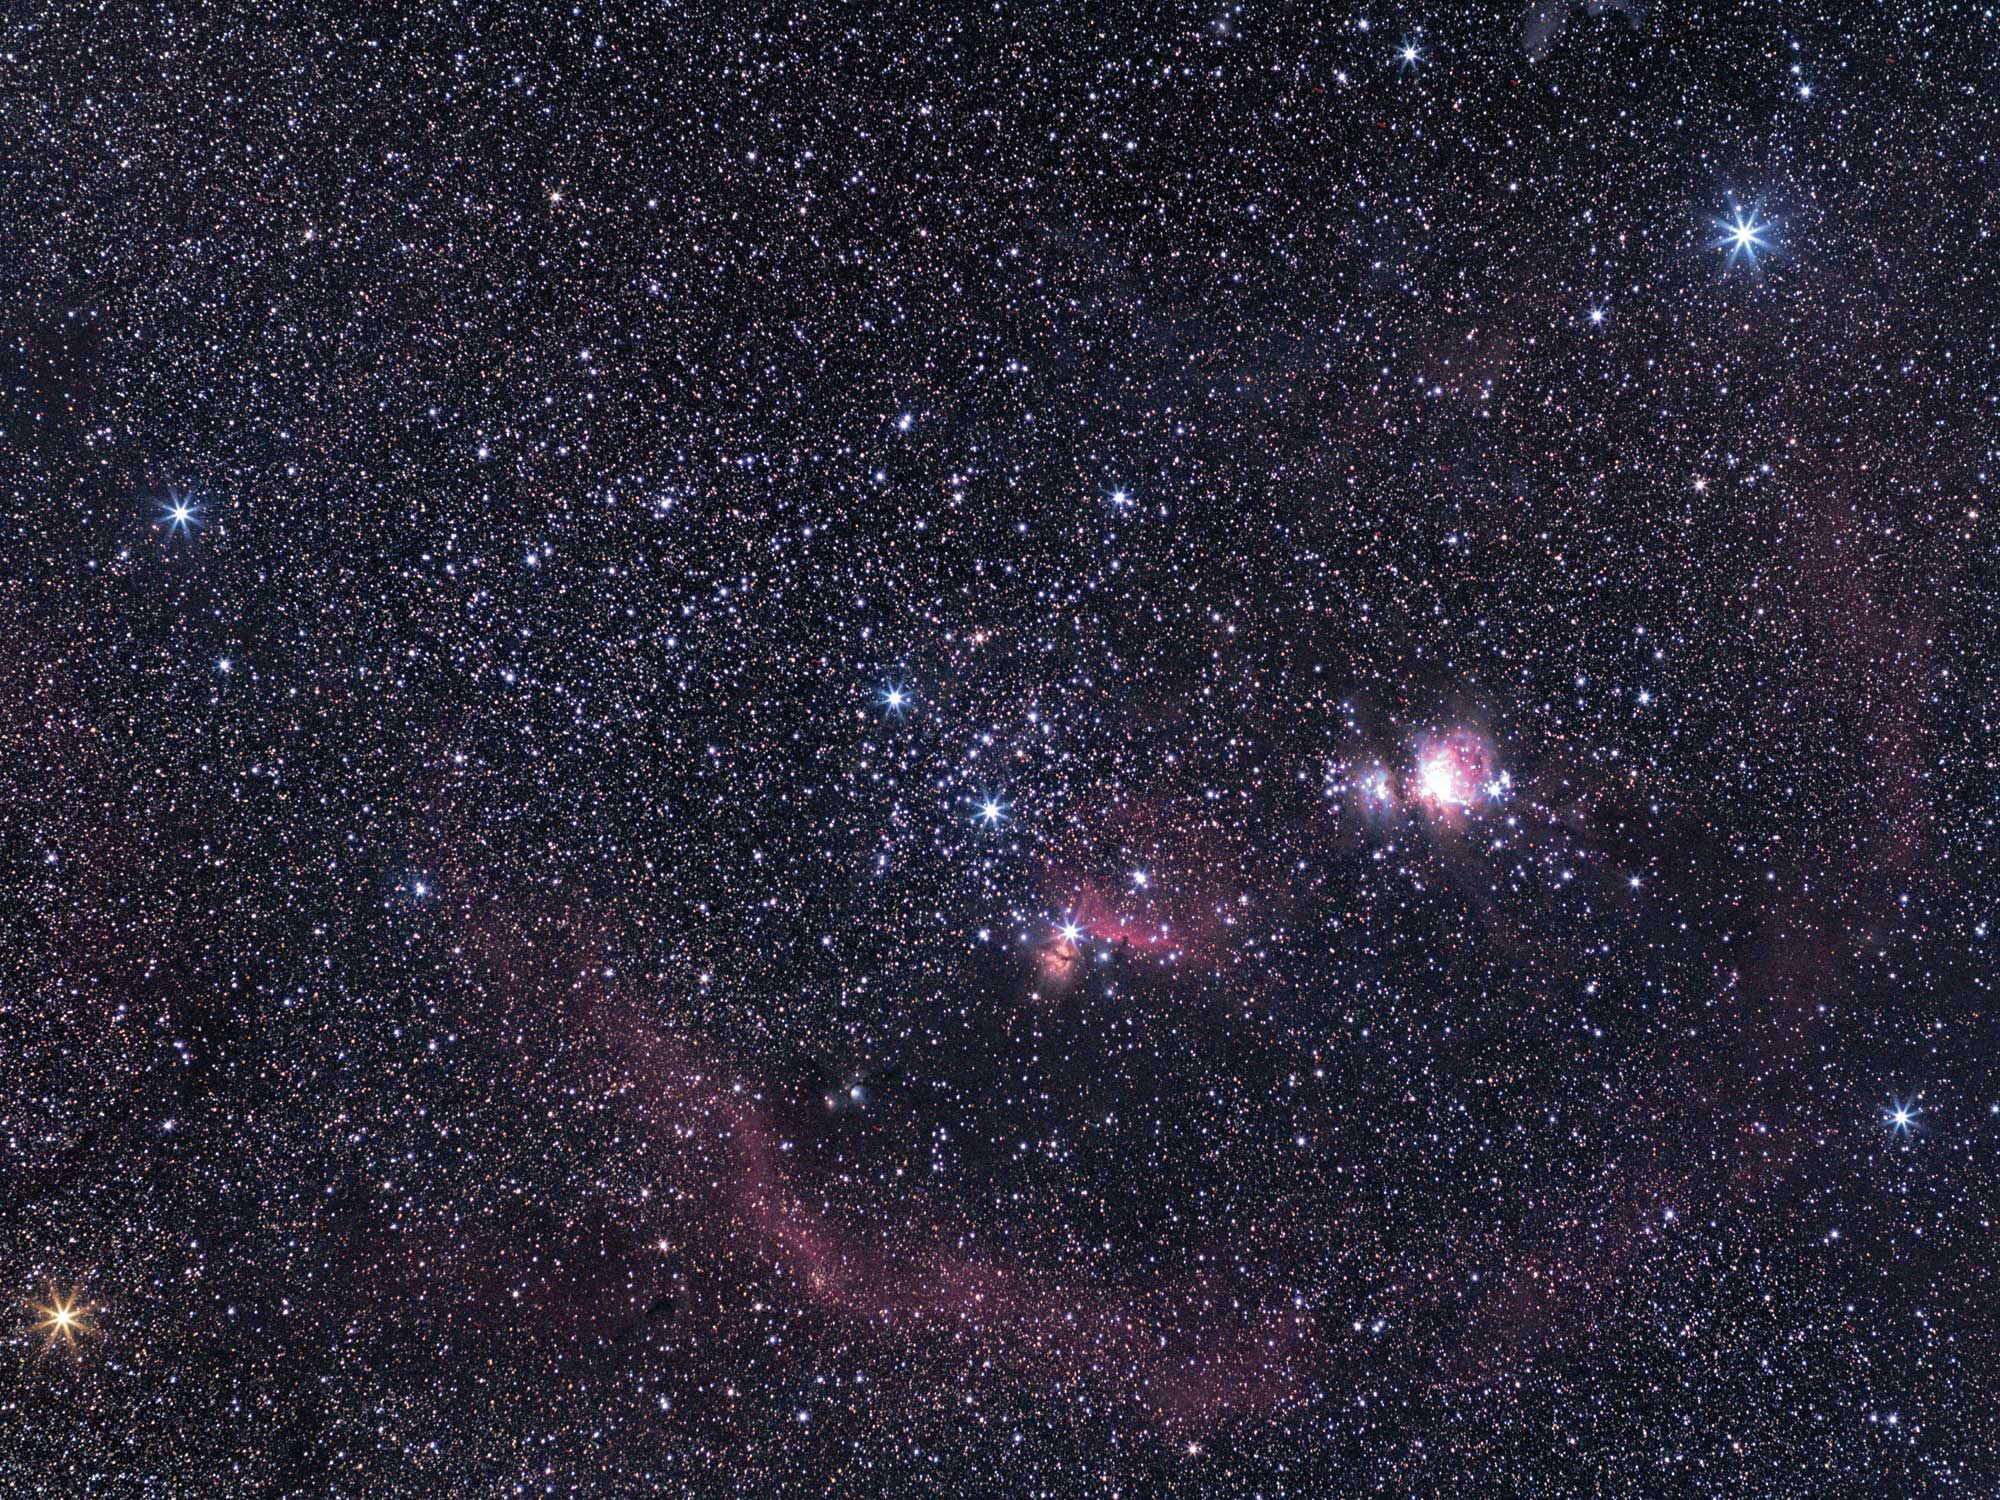 Widefield astrophotography of Orion using the ZWO ASI 294 MCPRO & Olympus 50mm vintage OM lens